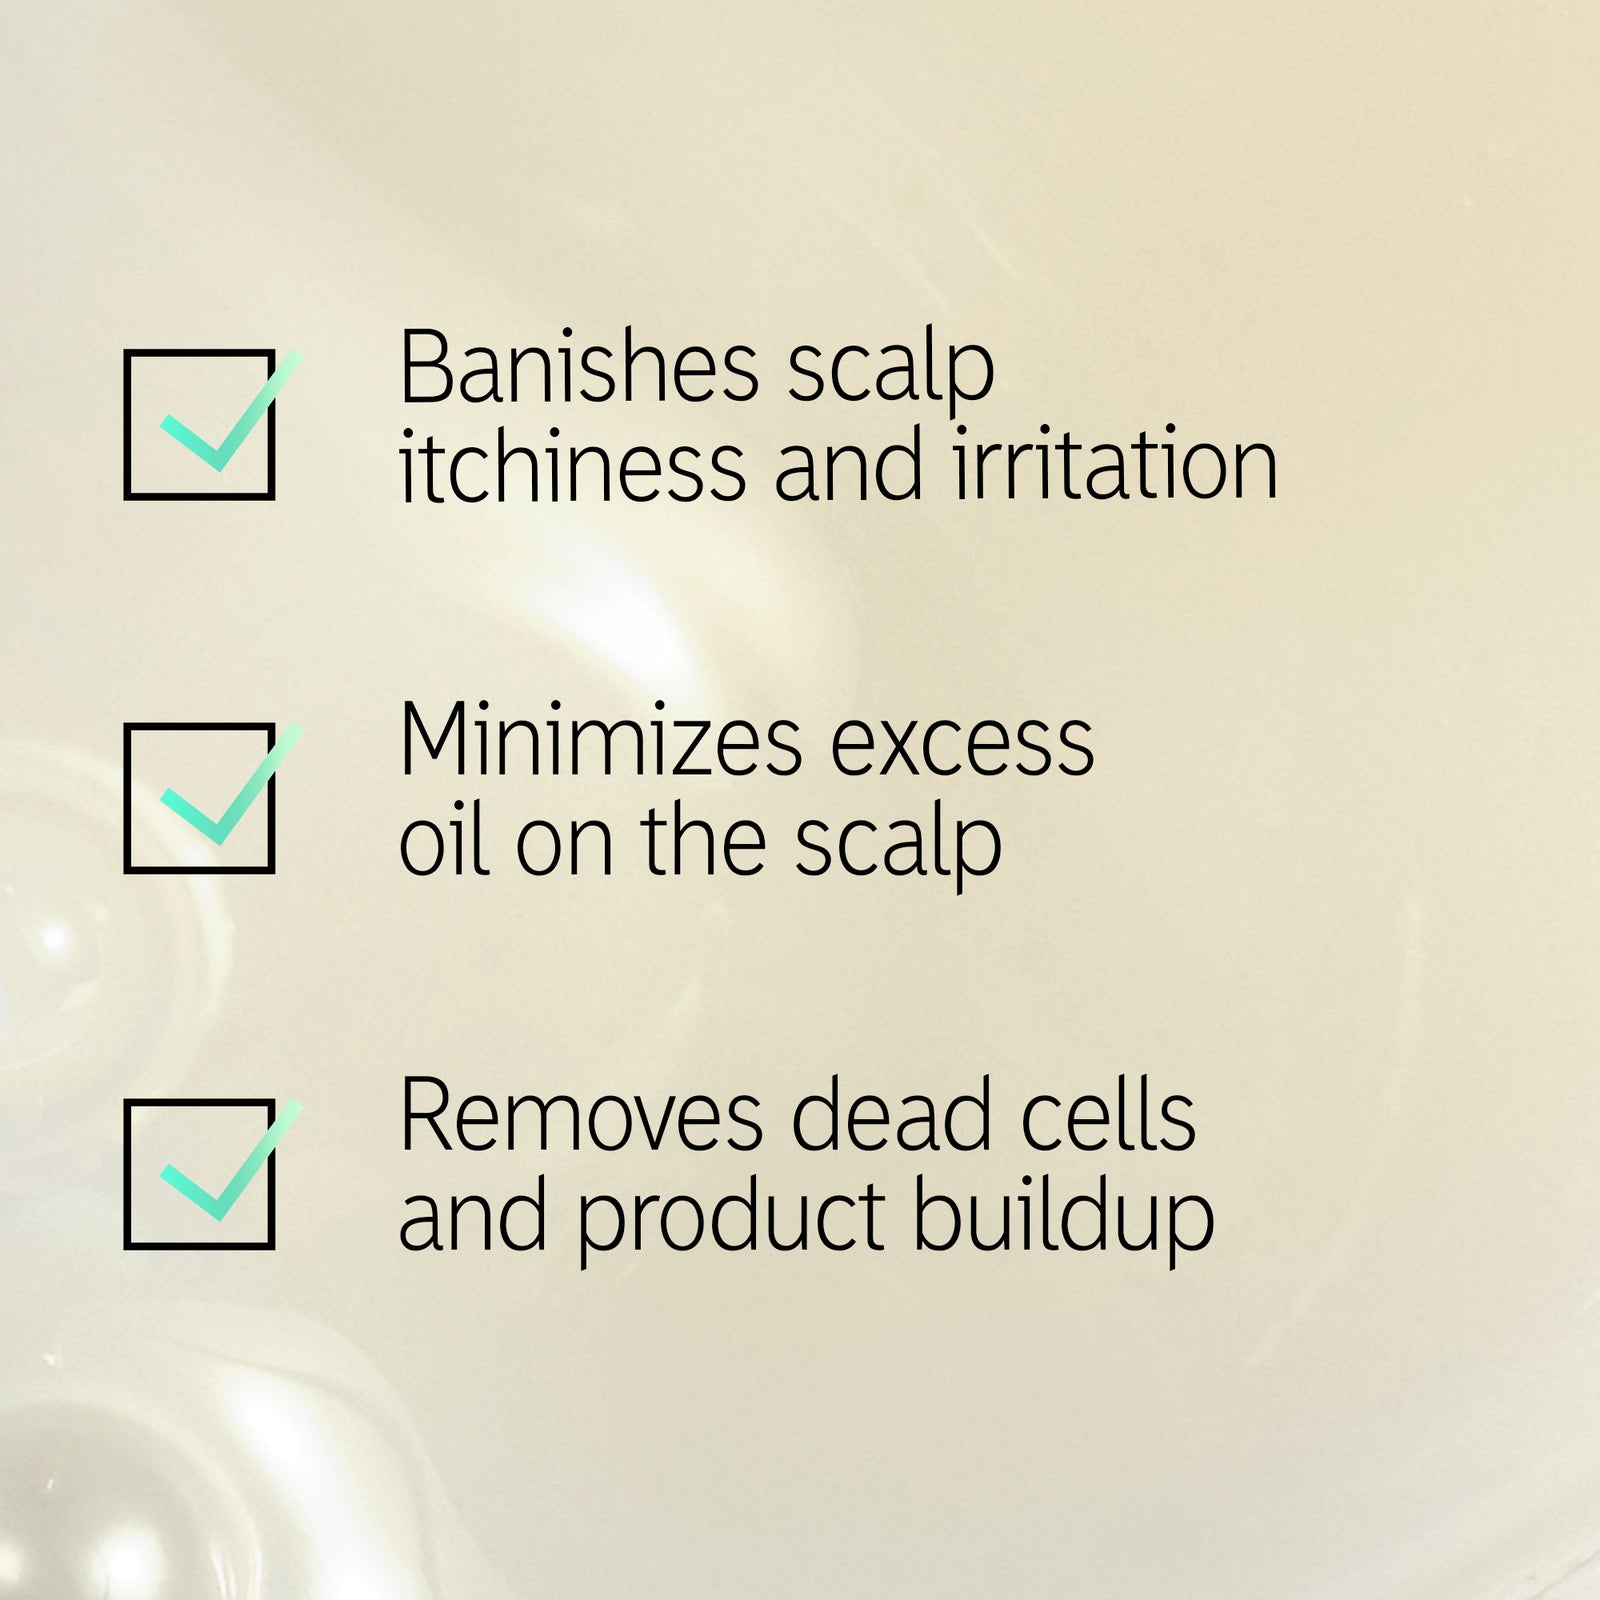 Main benefits 'Banishes scalp itchiness and irritation, minimizes excess oil on the scalp and removes dead cells and product buildup'